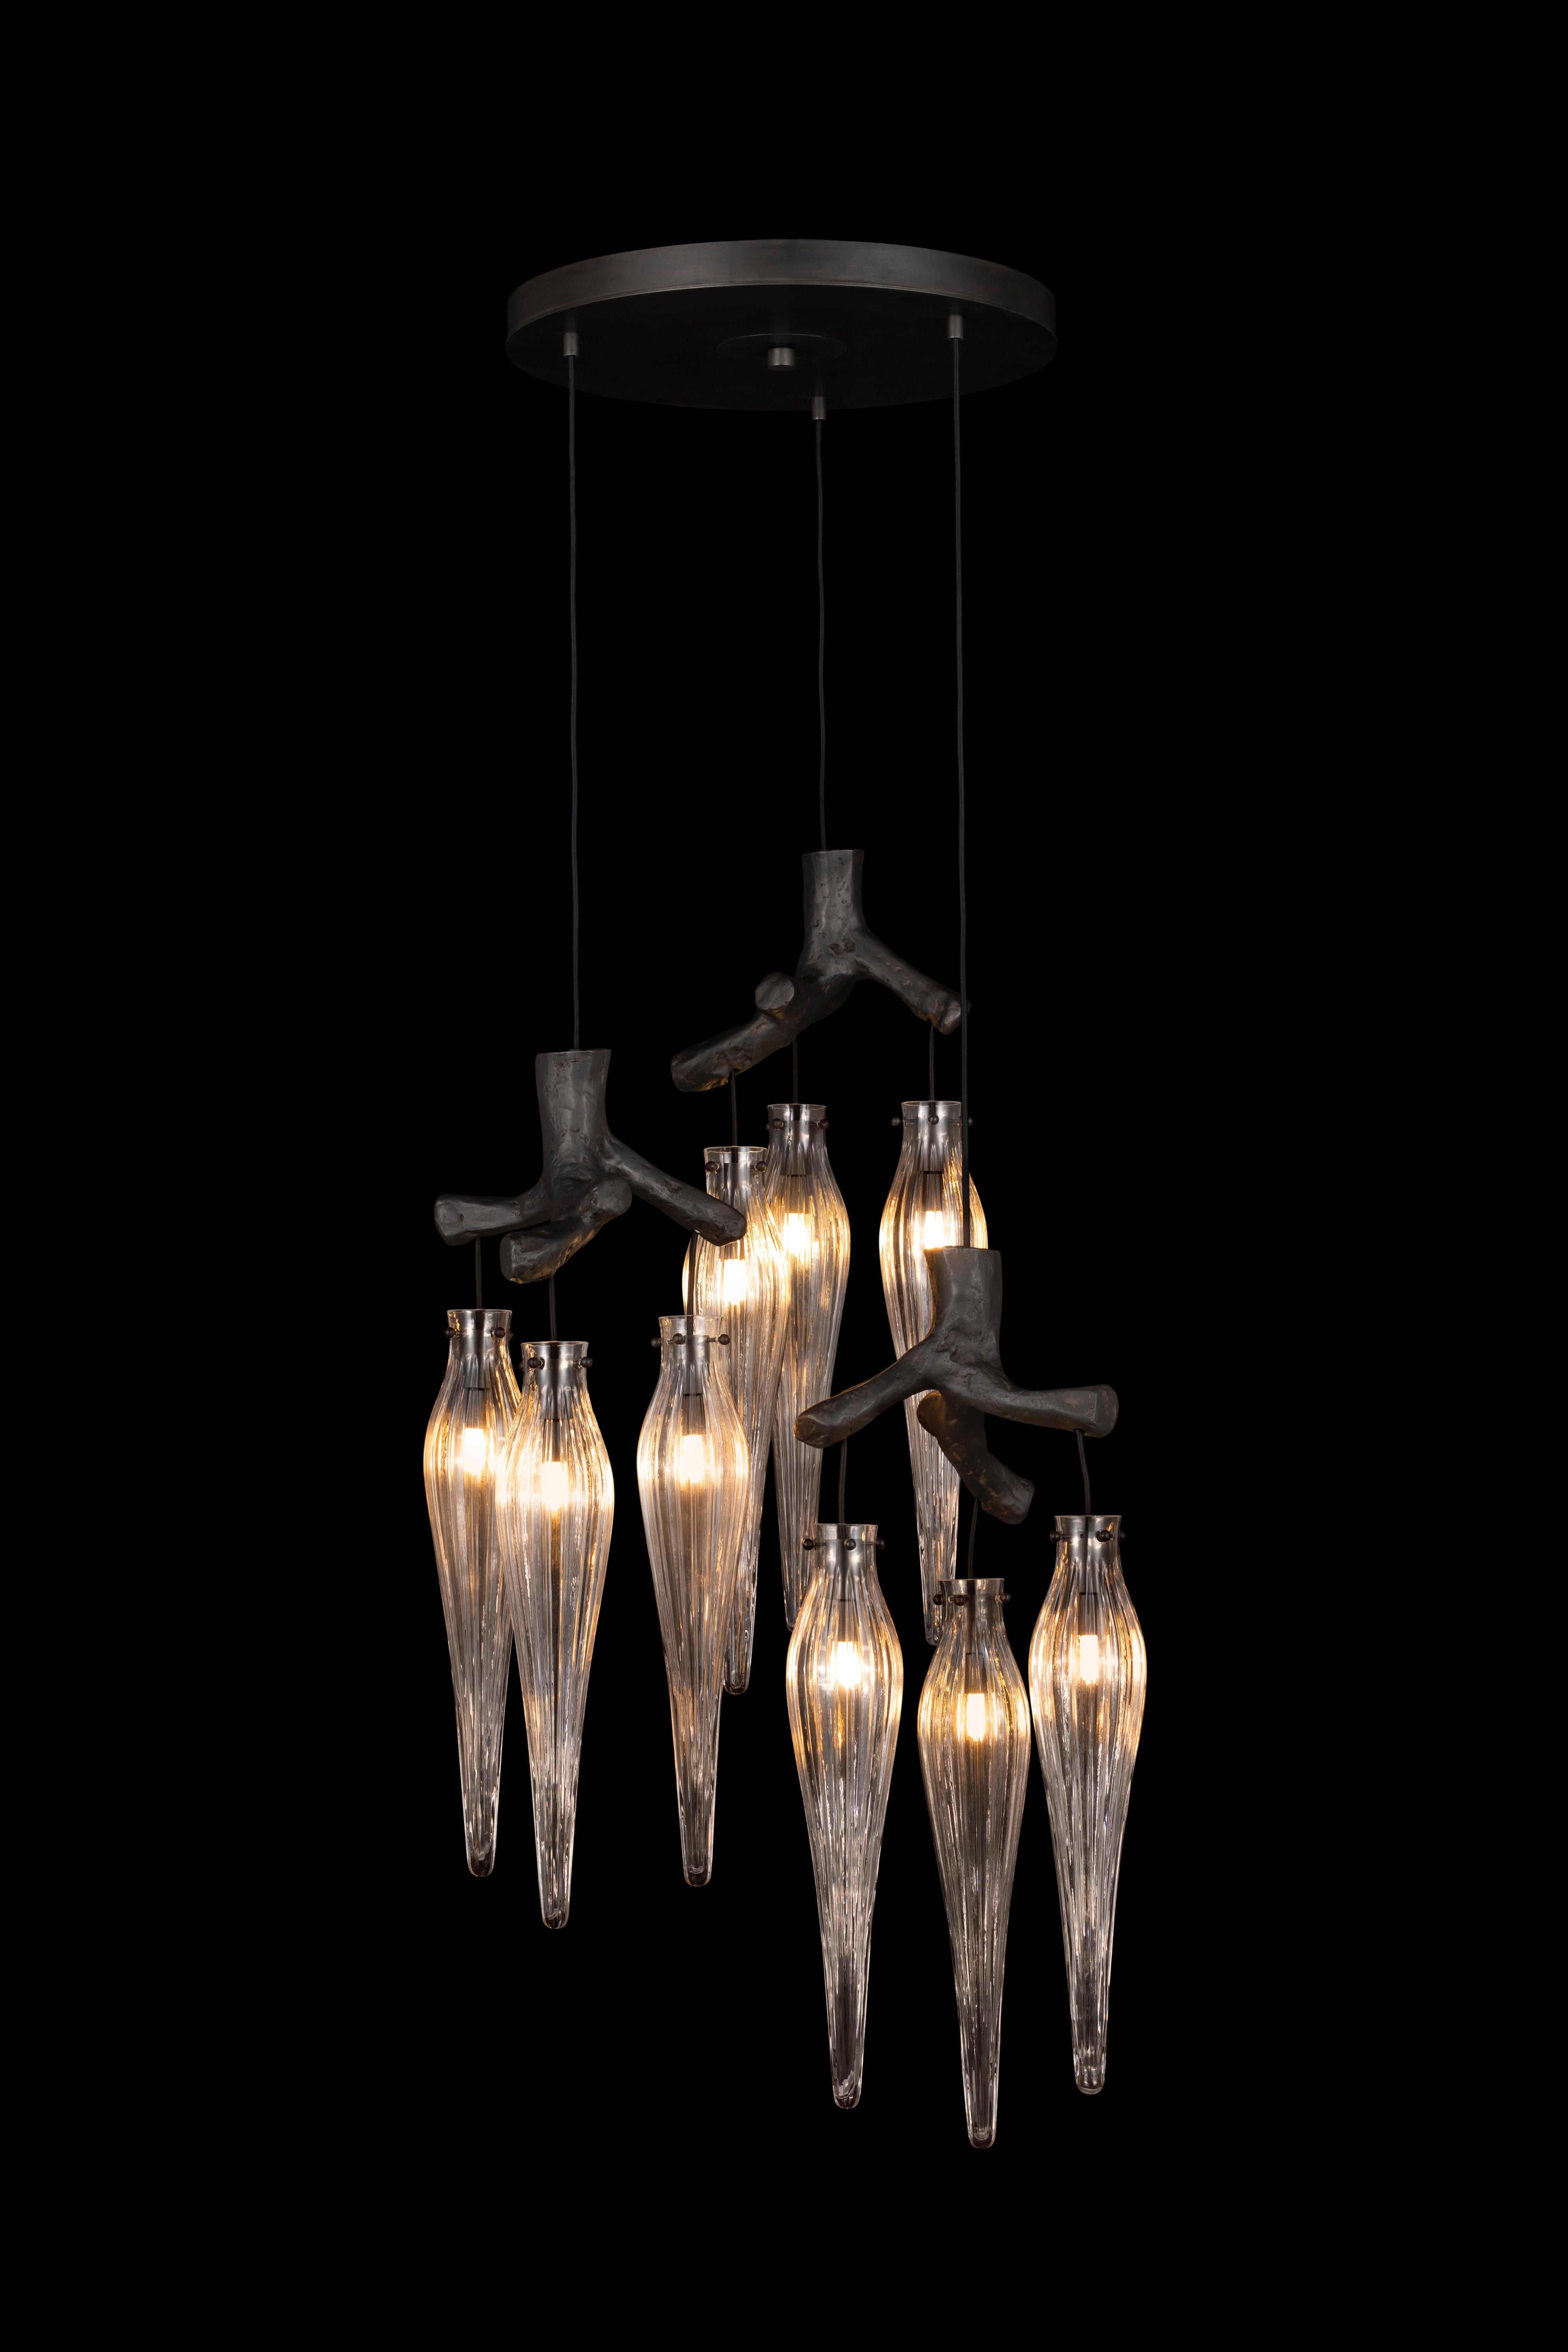 Modern Pendant Chandelier, Black Matte Finish, Primavera Collection In New Condition For Sale In Naarden, NL